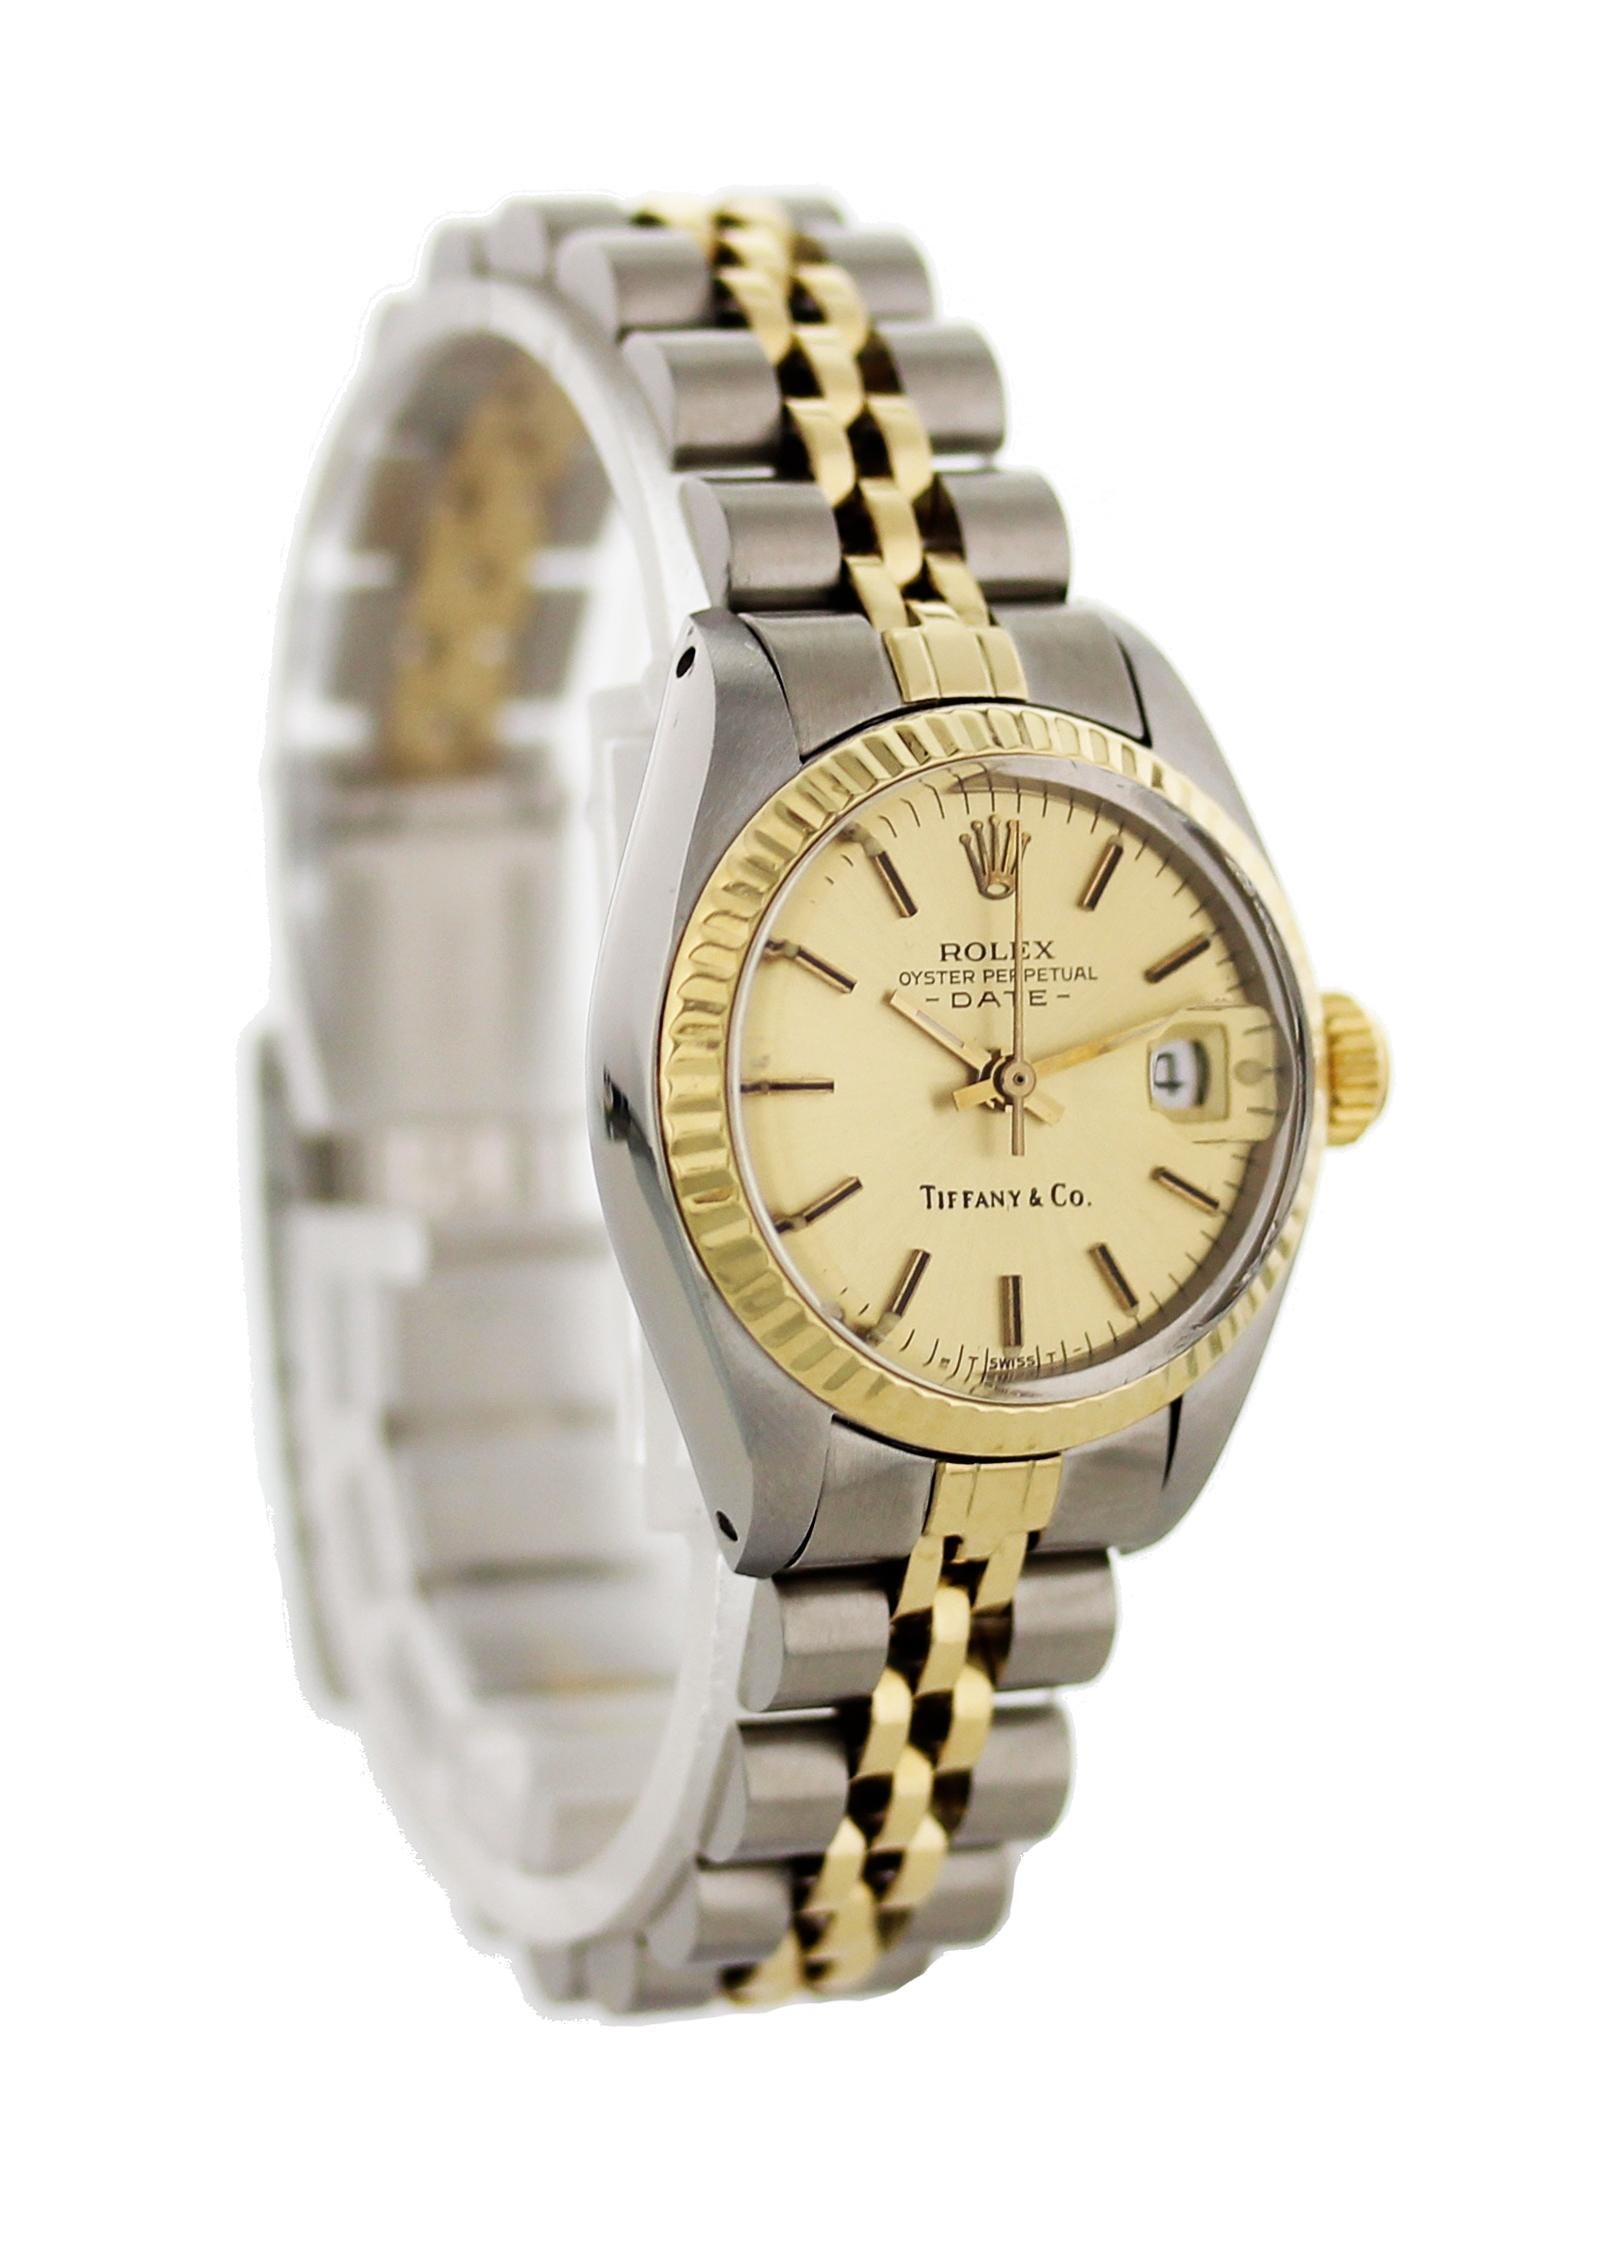 Rolex Oyster Perpetual Date 6917 Ladies Watch In Excellent Condition For Sale In New York, NY